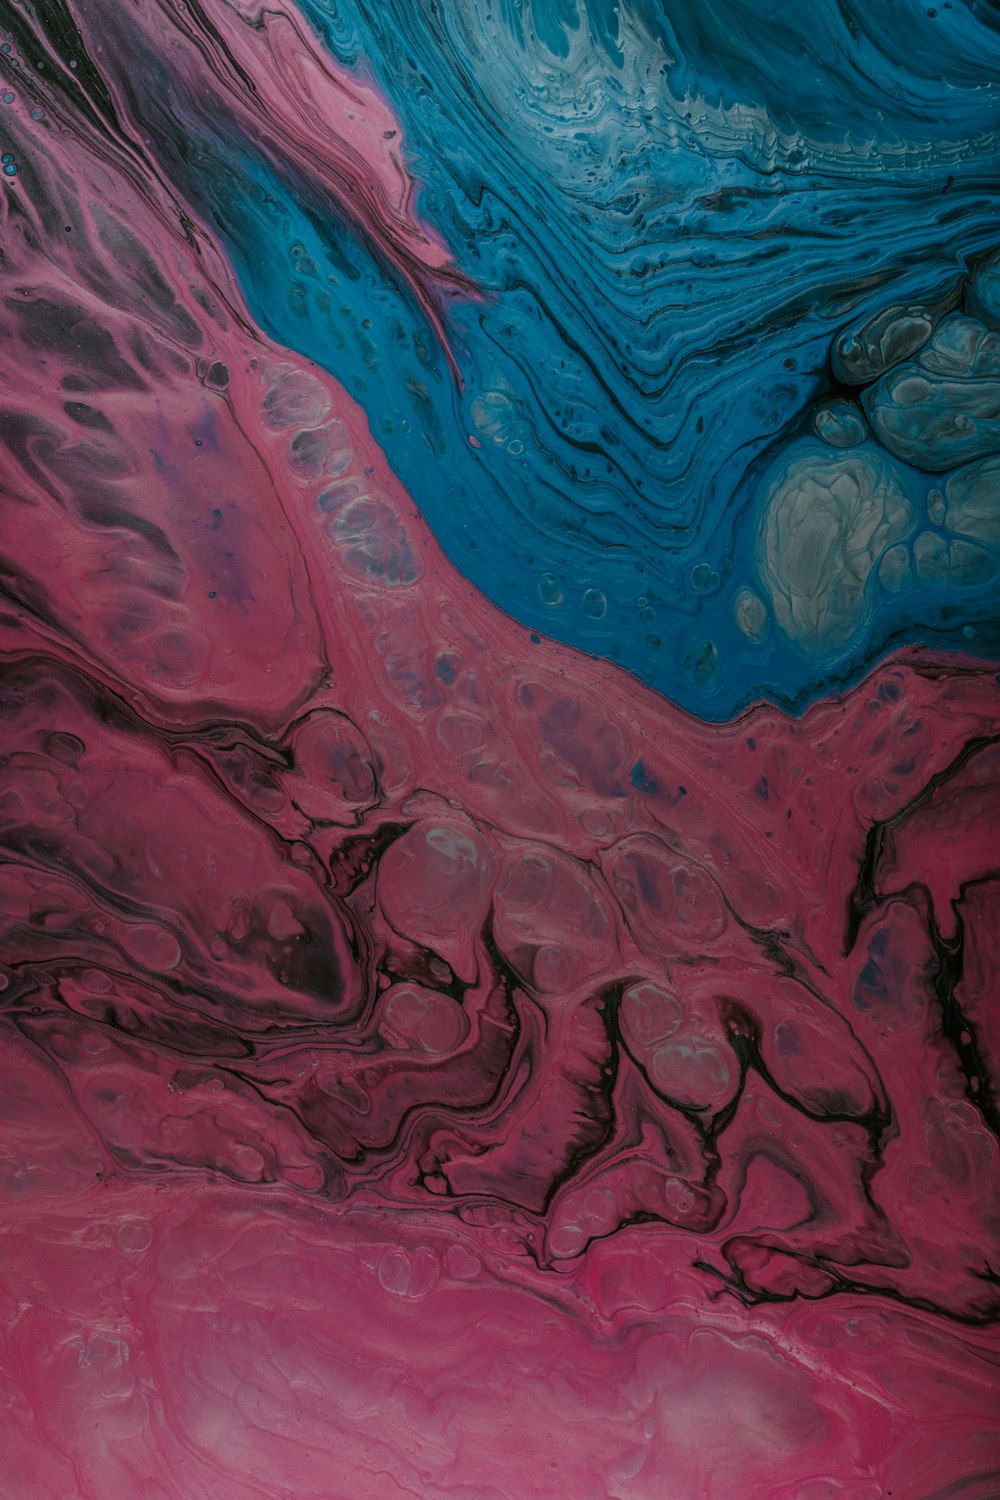 blue and pink abstract painting